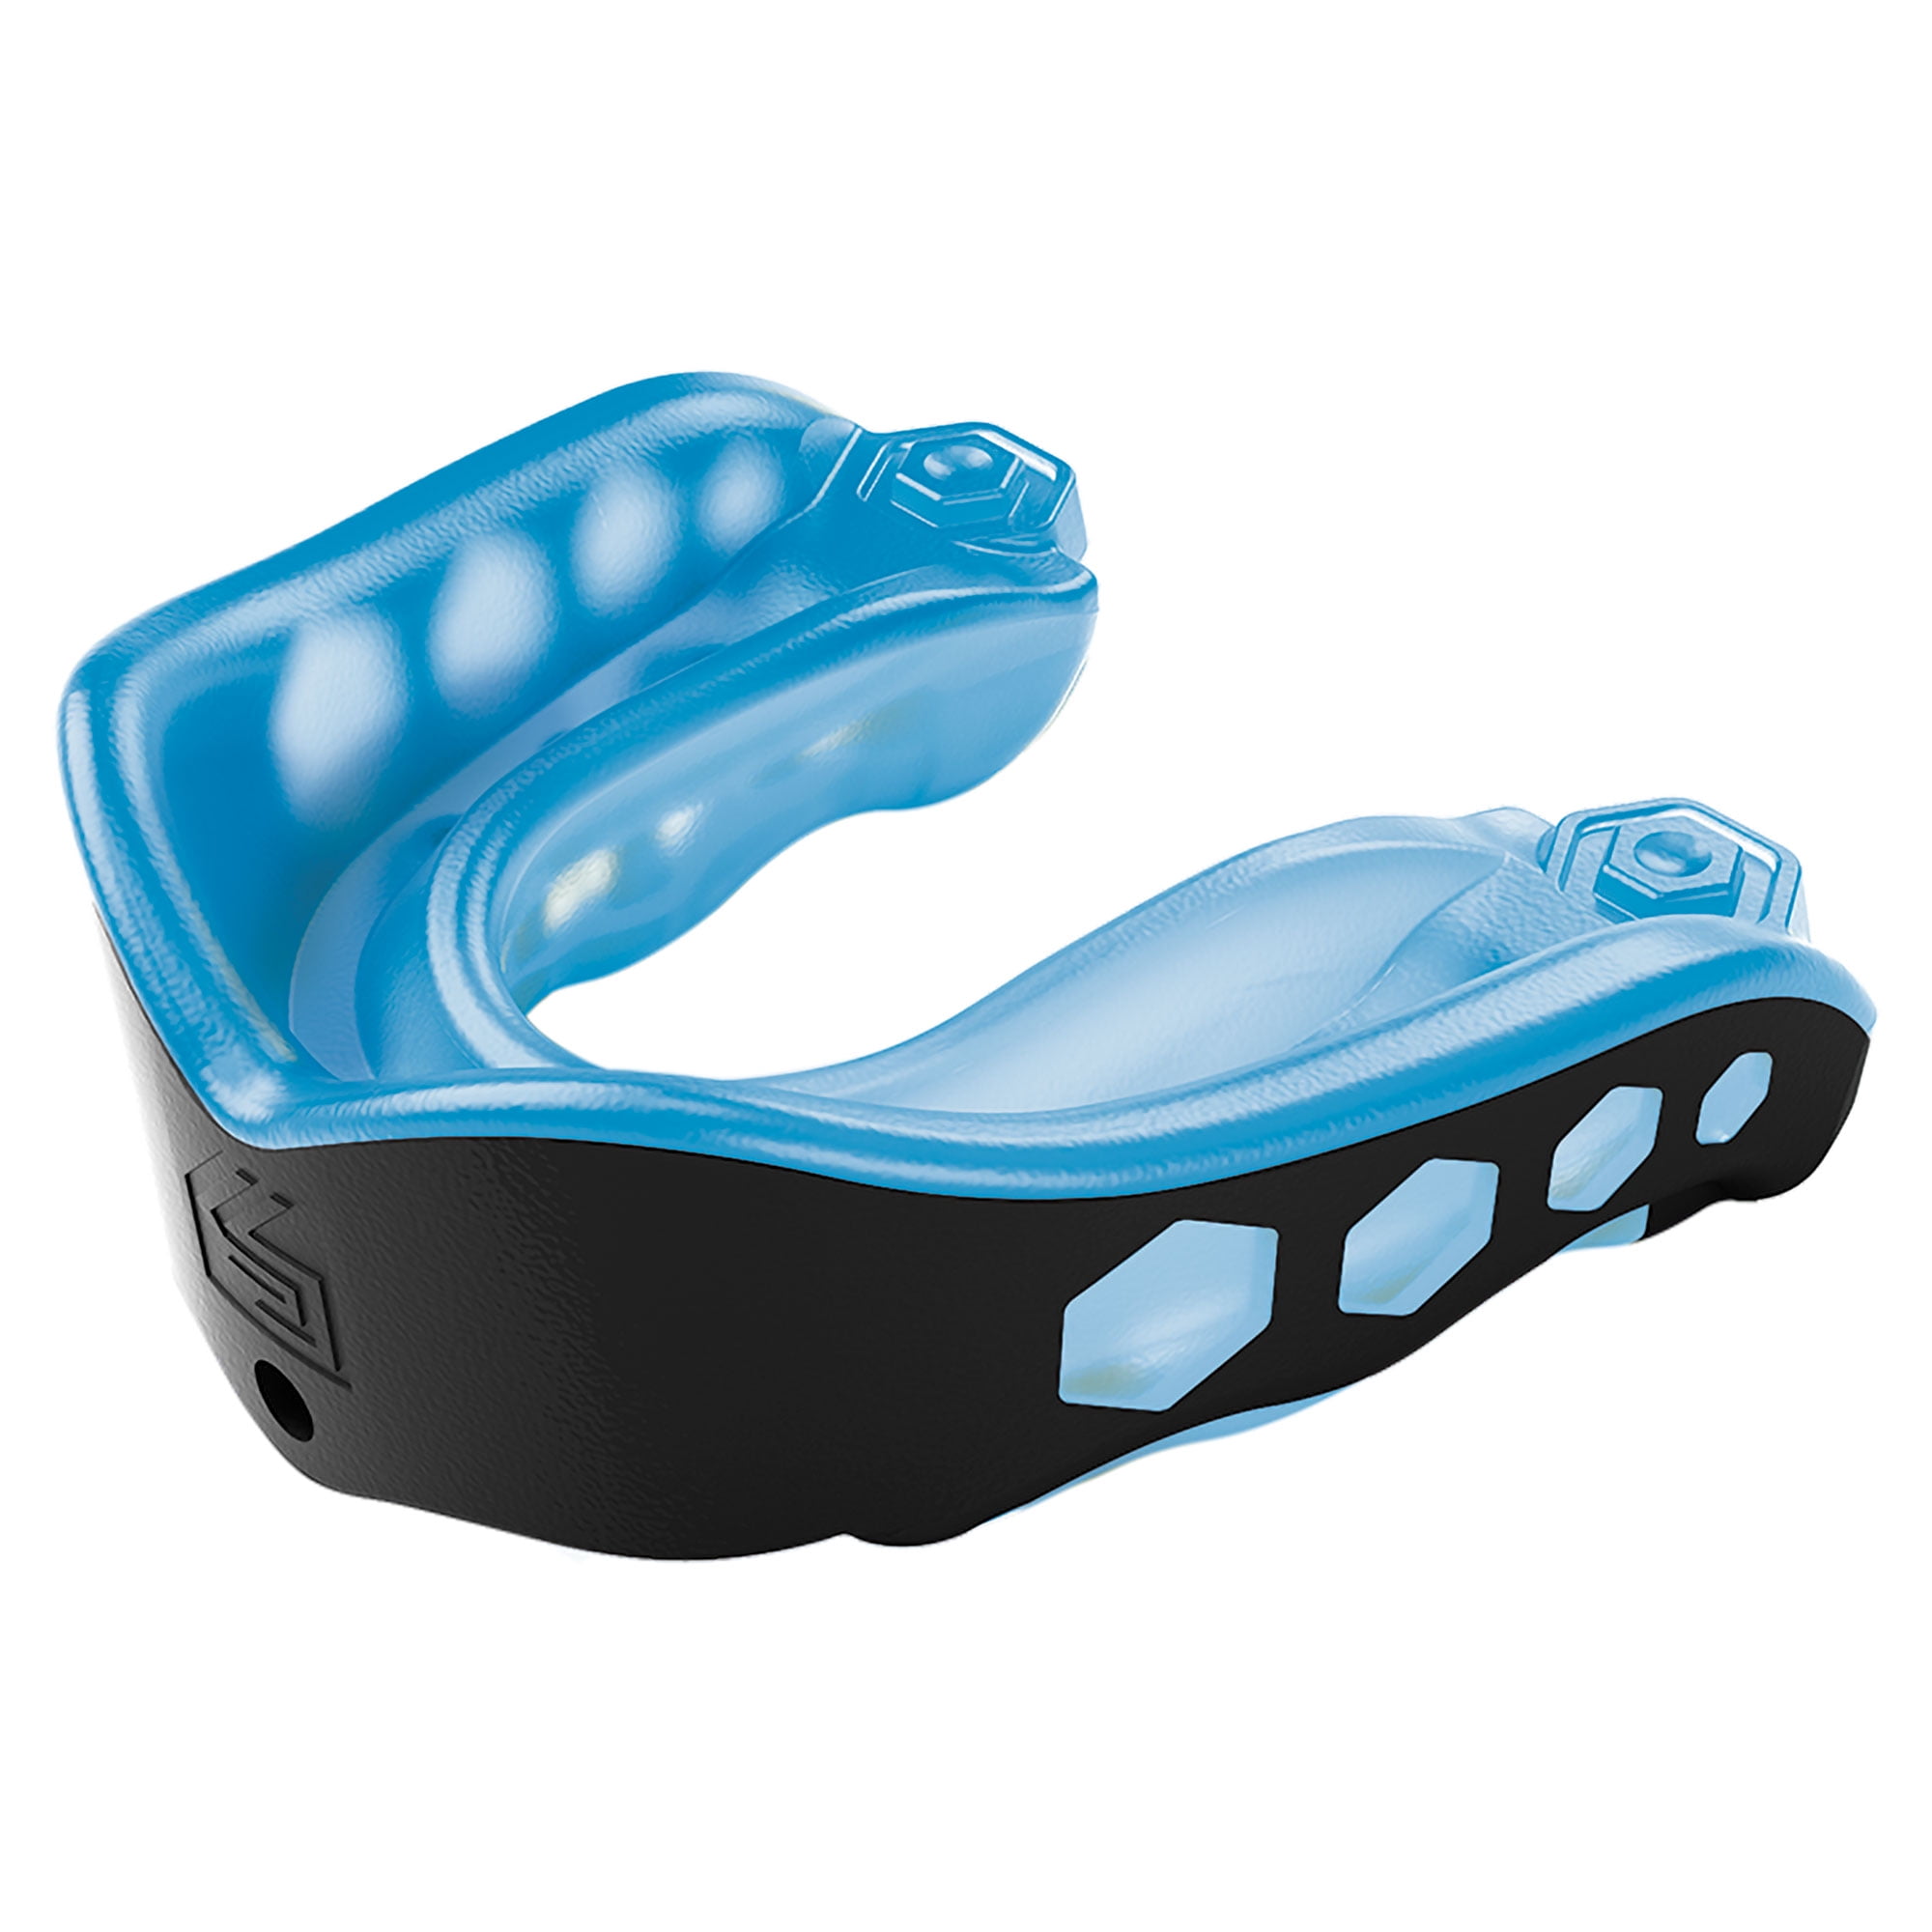 Mouth guard Gel max V2 Boxing Rugby MMA Hockey gum shield 